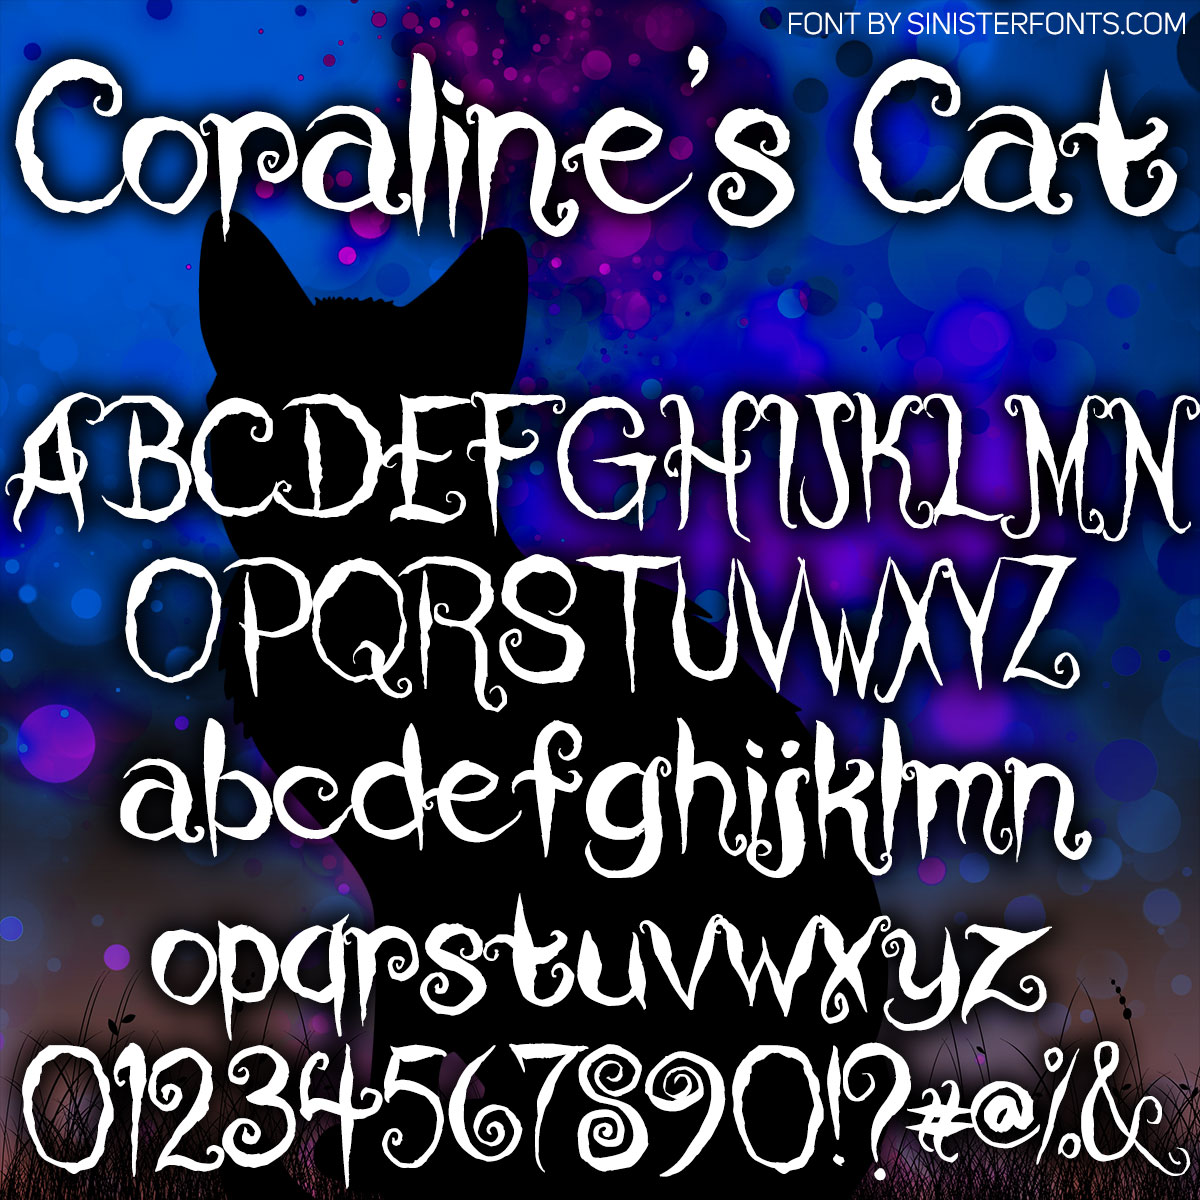 Coraline's Cat - Font by Chad Savage